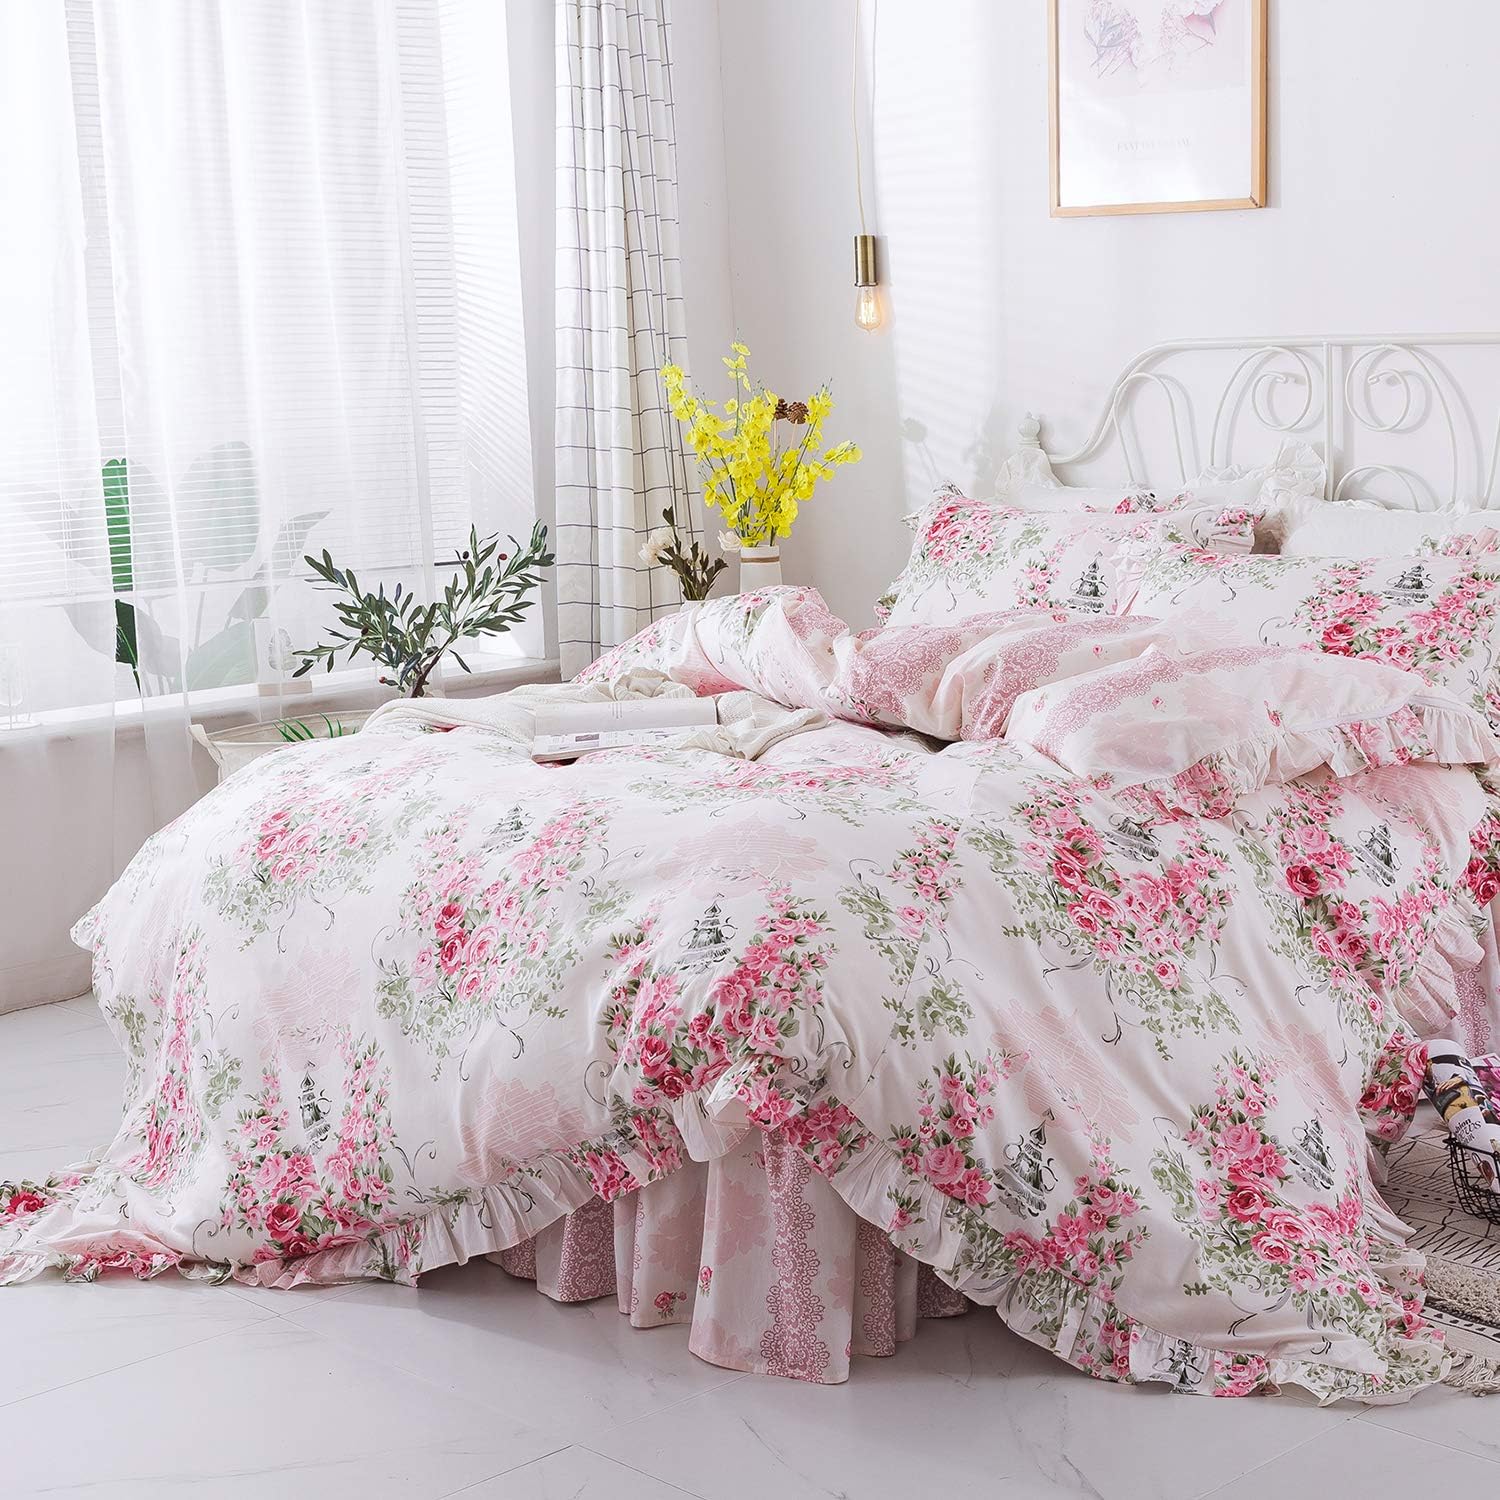 FADFAY Duvet Cover Set Queen Elegant and Shabby Pink Rosette Floral Bedding with Hidden Zipper Closure 100% Cotton with Floral Bedskirt 4 Pieces Queen Size